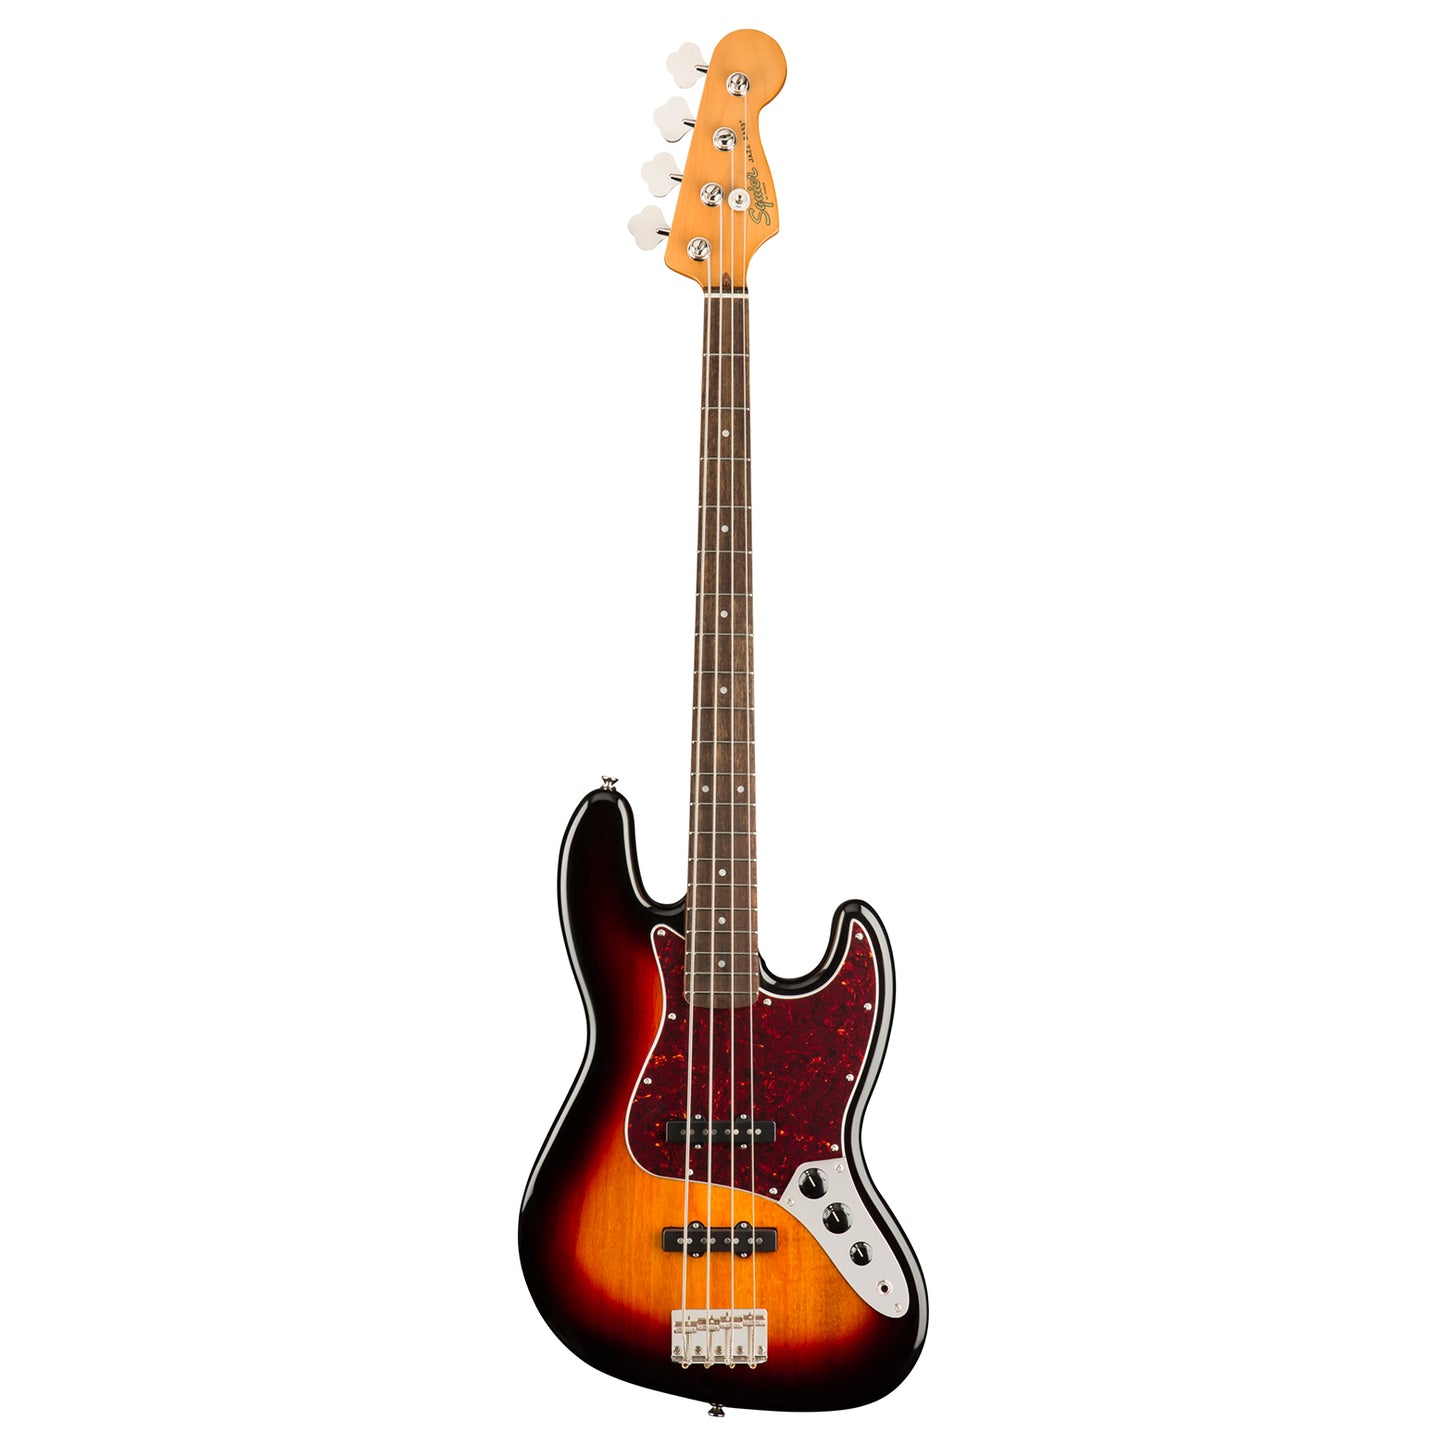 Squier by Fender Classic Vibe '60s Jazz Bass Electric Guitar Vintage Style LRL with SS Pickup, Nickel Plated Hardware (Sunburst, Blue, Black)